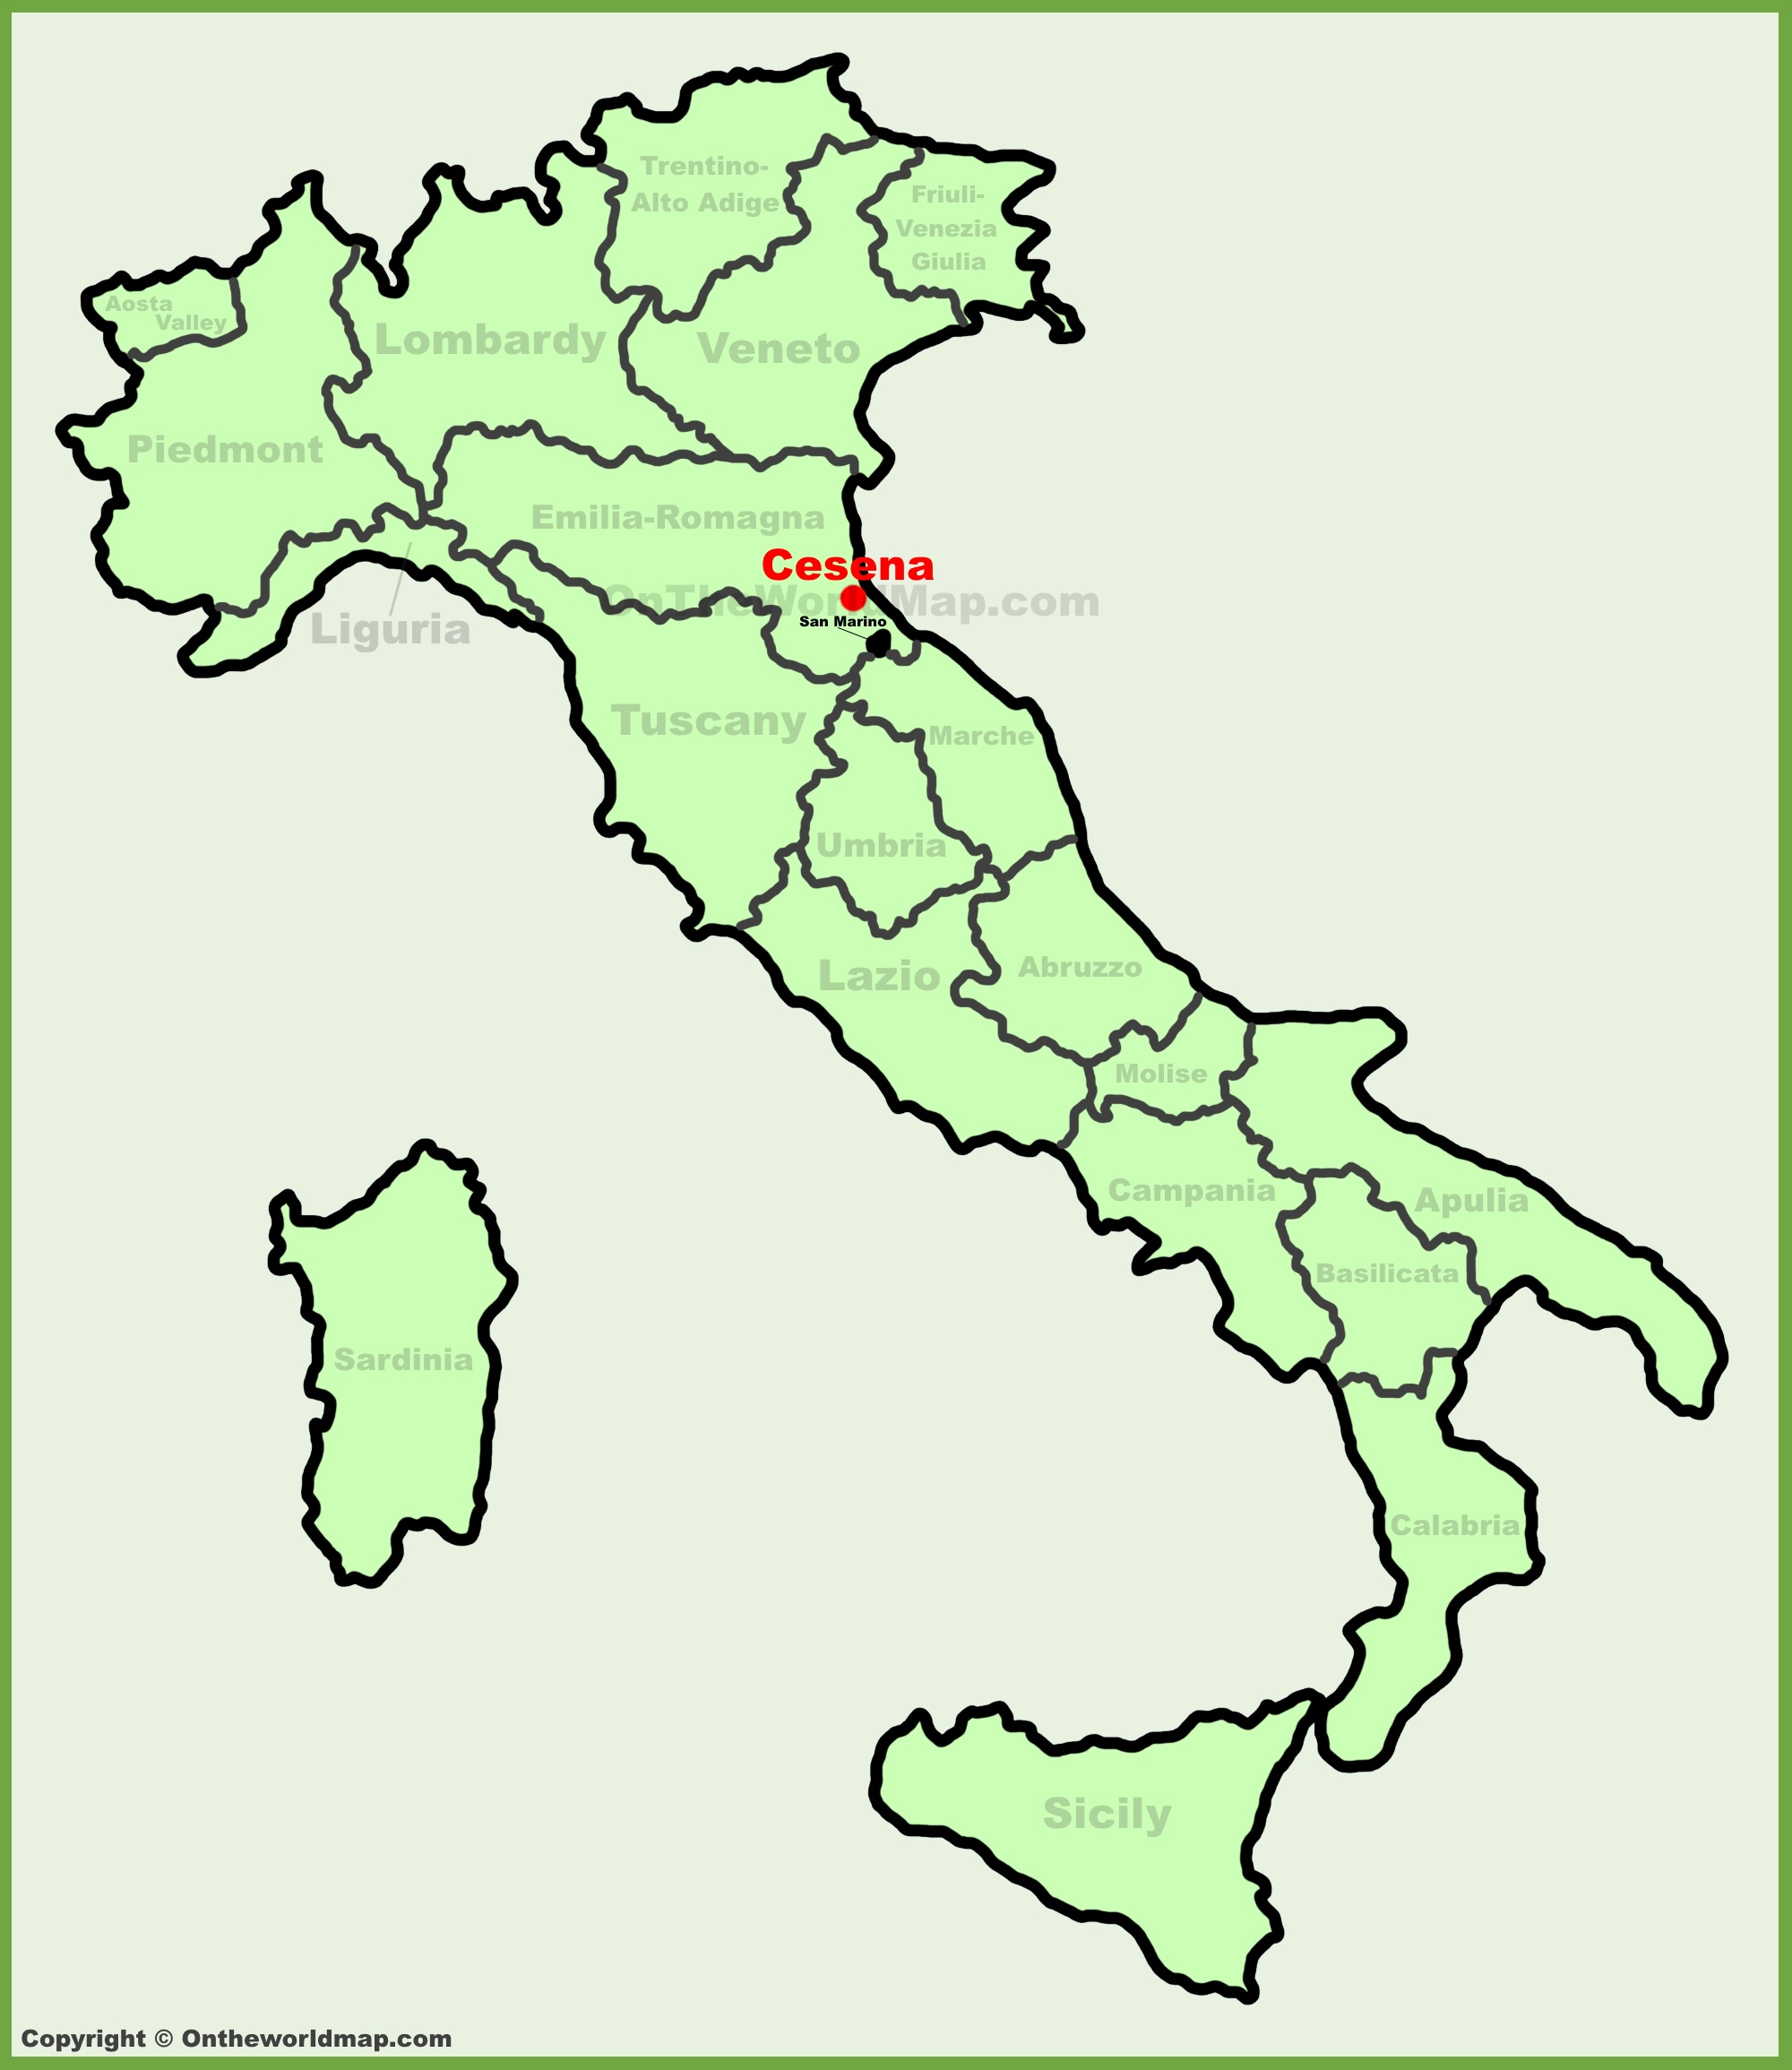 Cesena location on the Italy map